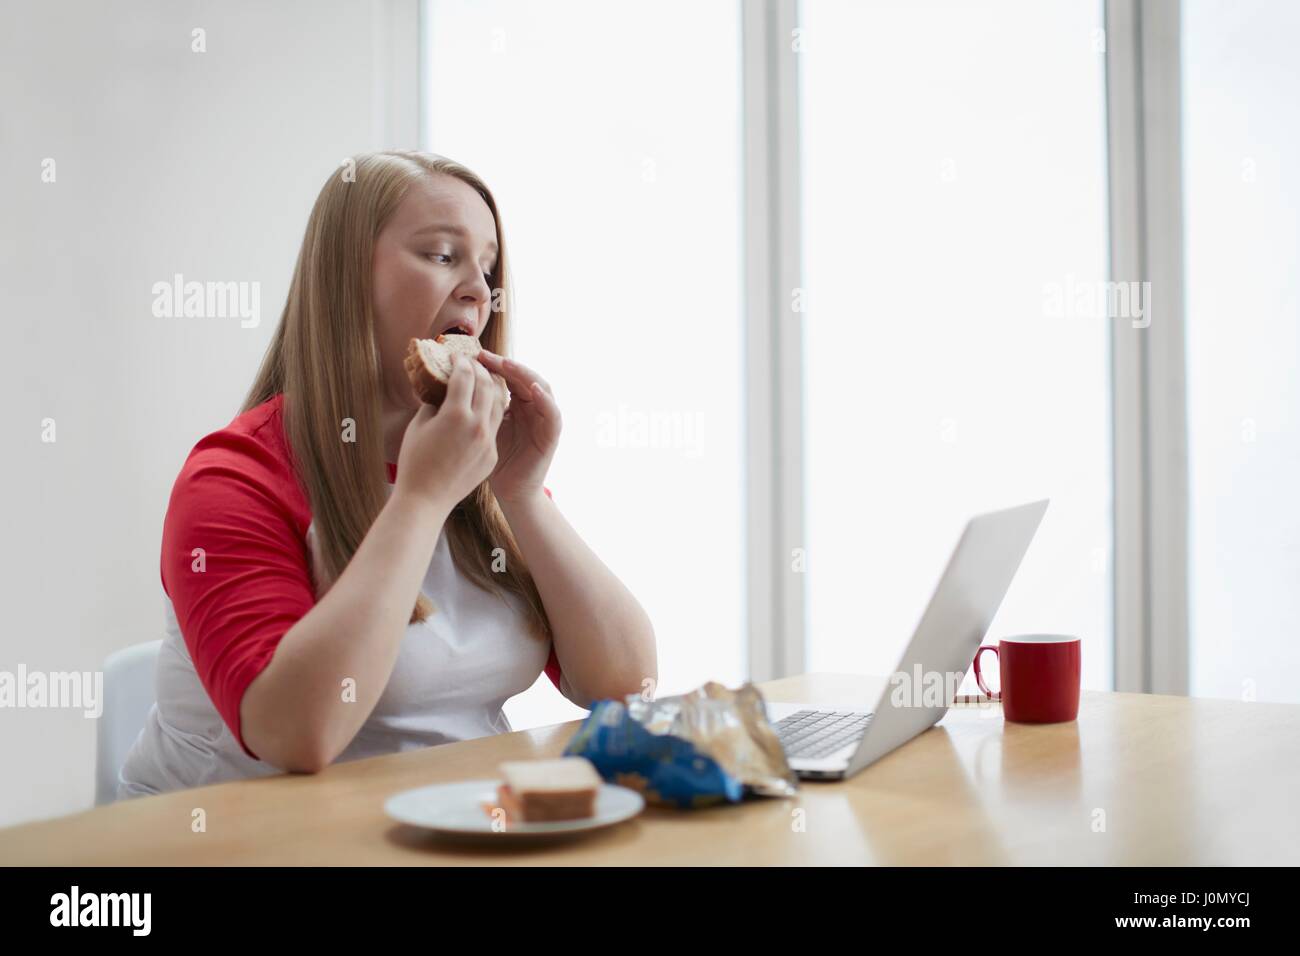 Young woman with laptop eating sandwich. Banque D'Images